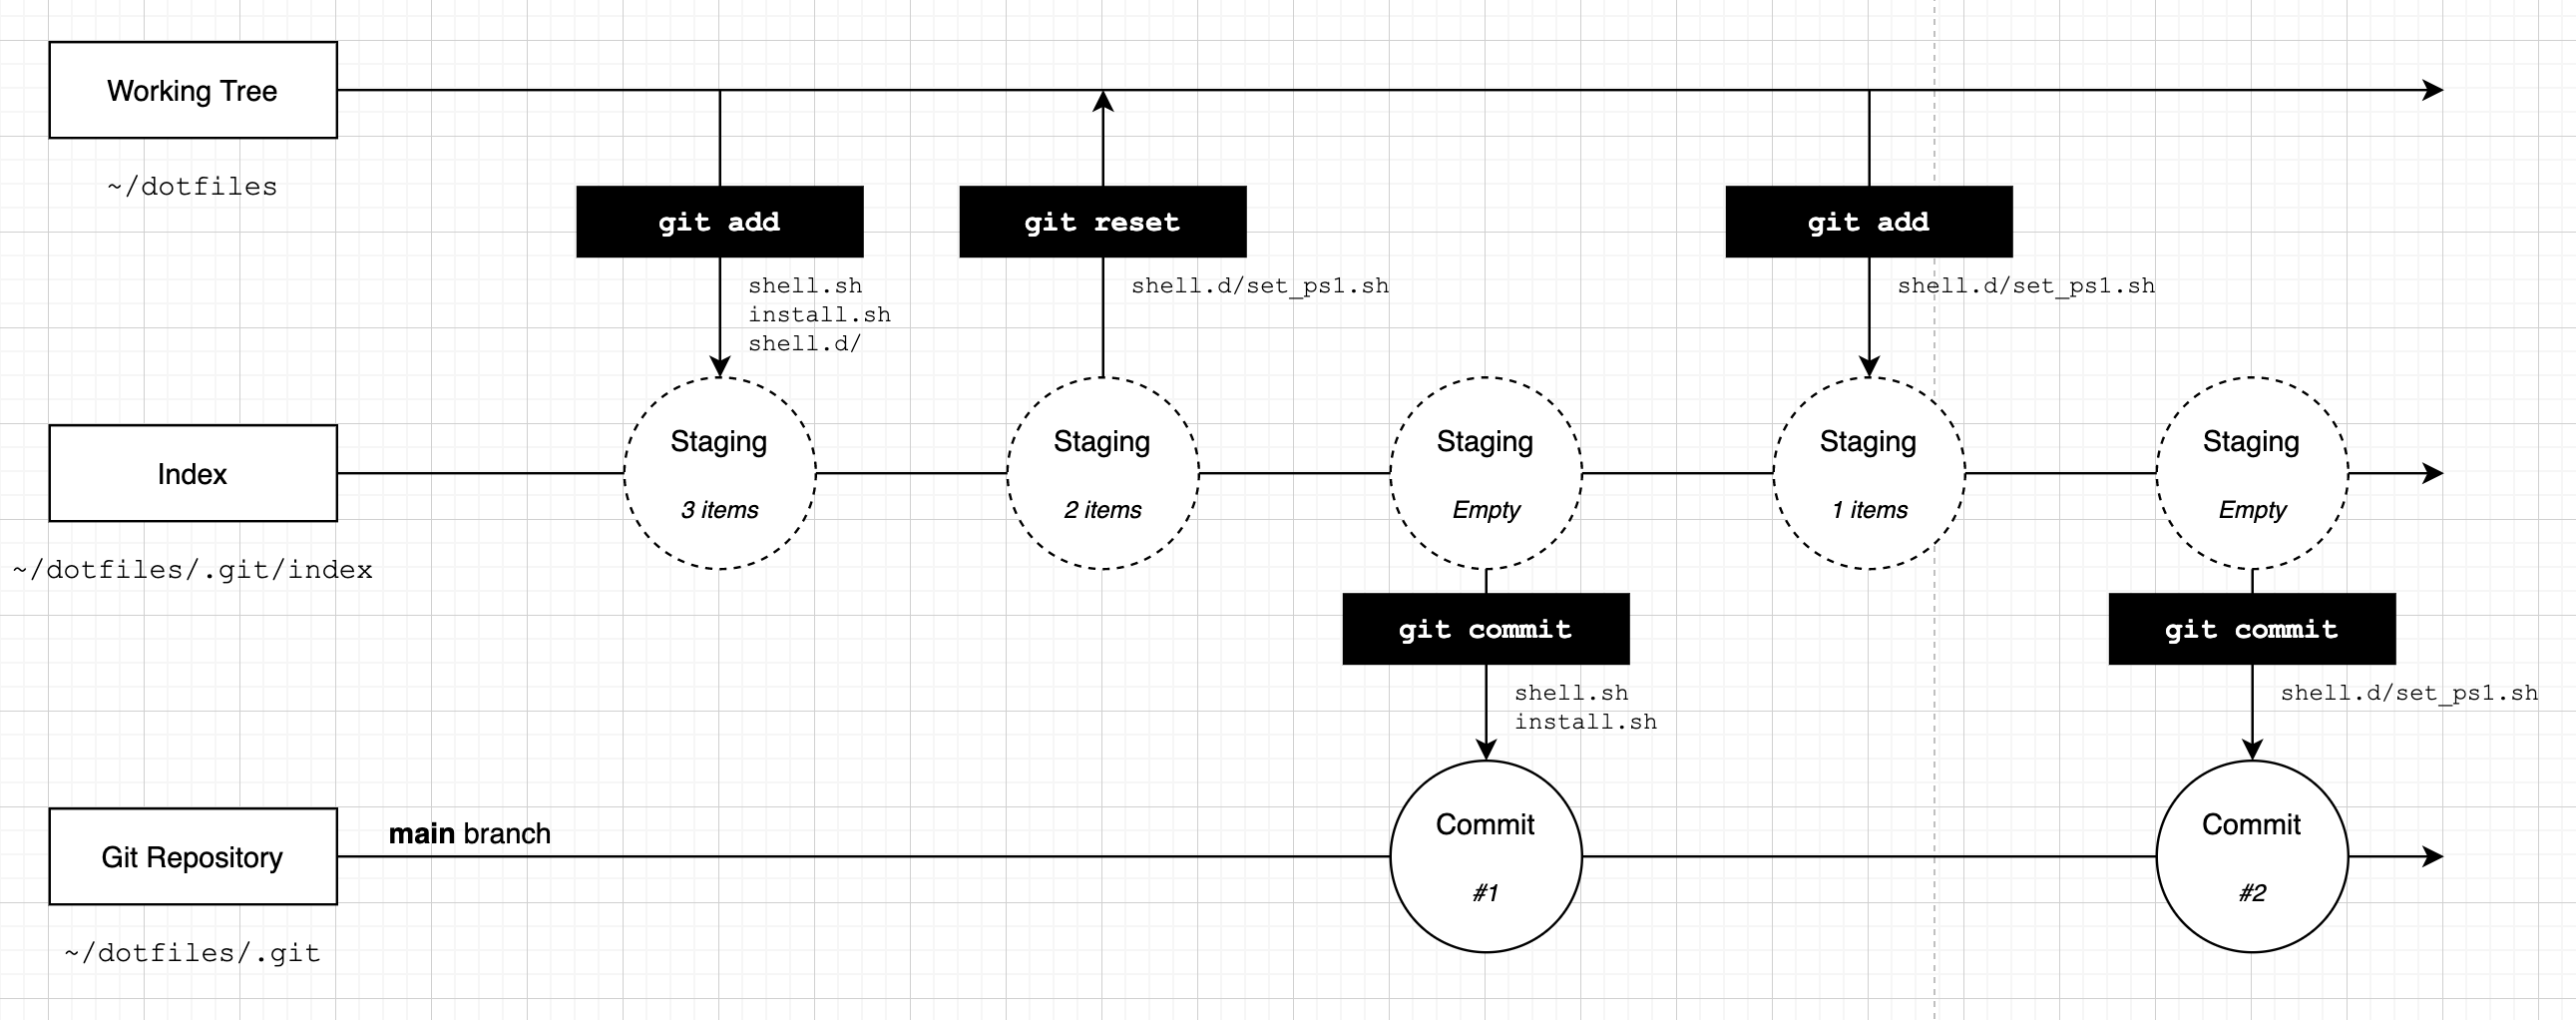 Diagram showing our second git commit